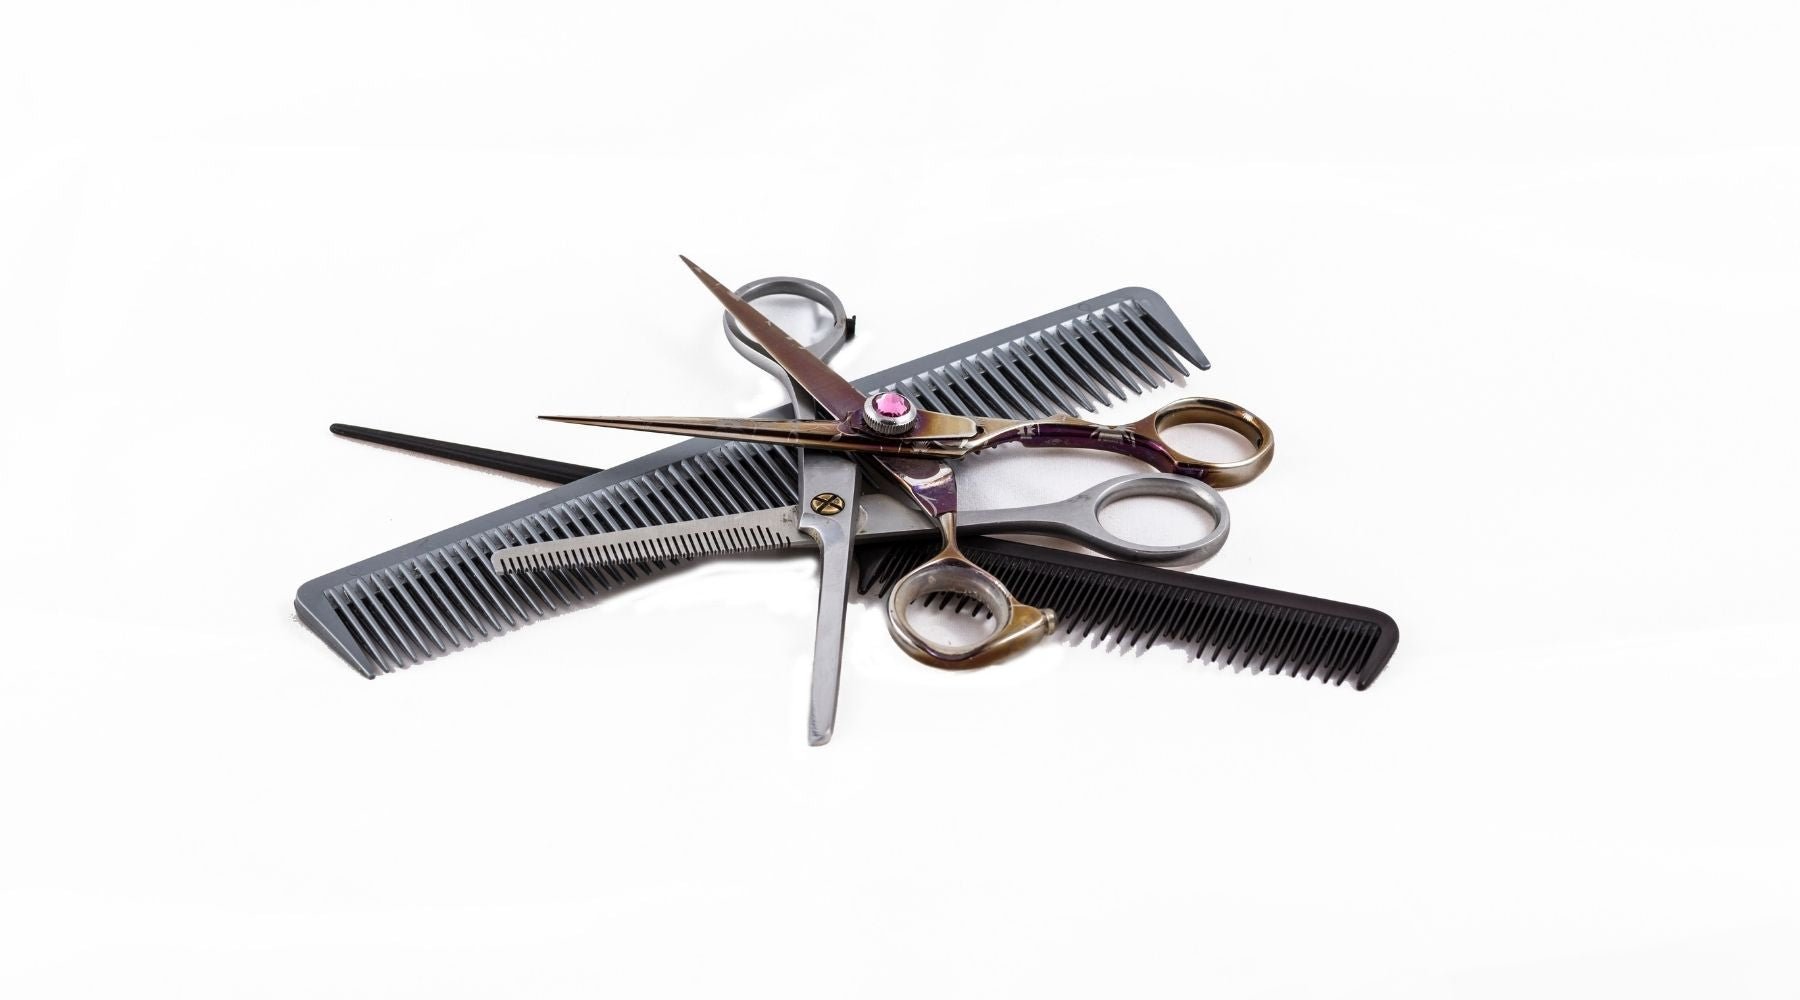 How To Prolong The Life of Your Hairdressing Scissors - Japan Scissors USA